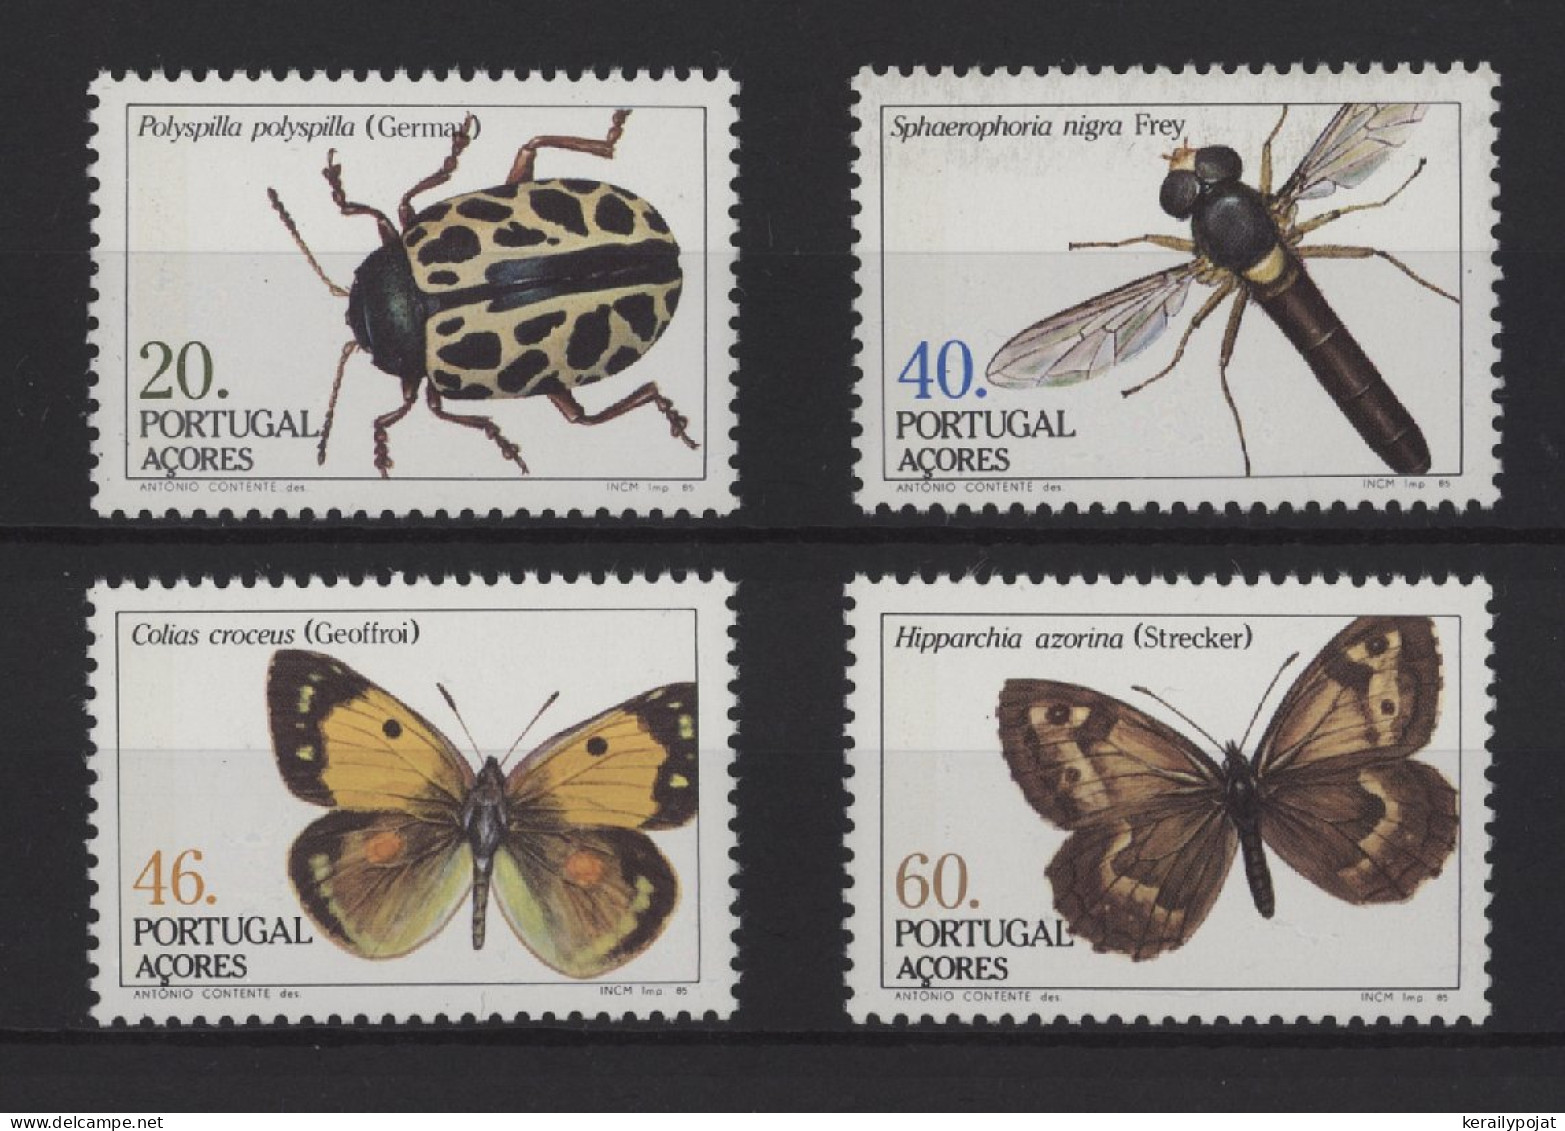 Azores - 1985 Insects MNH__(TH-26949) - Azores